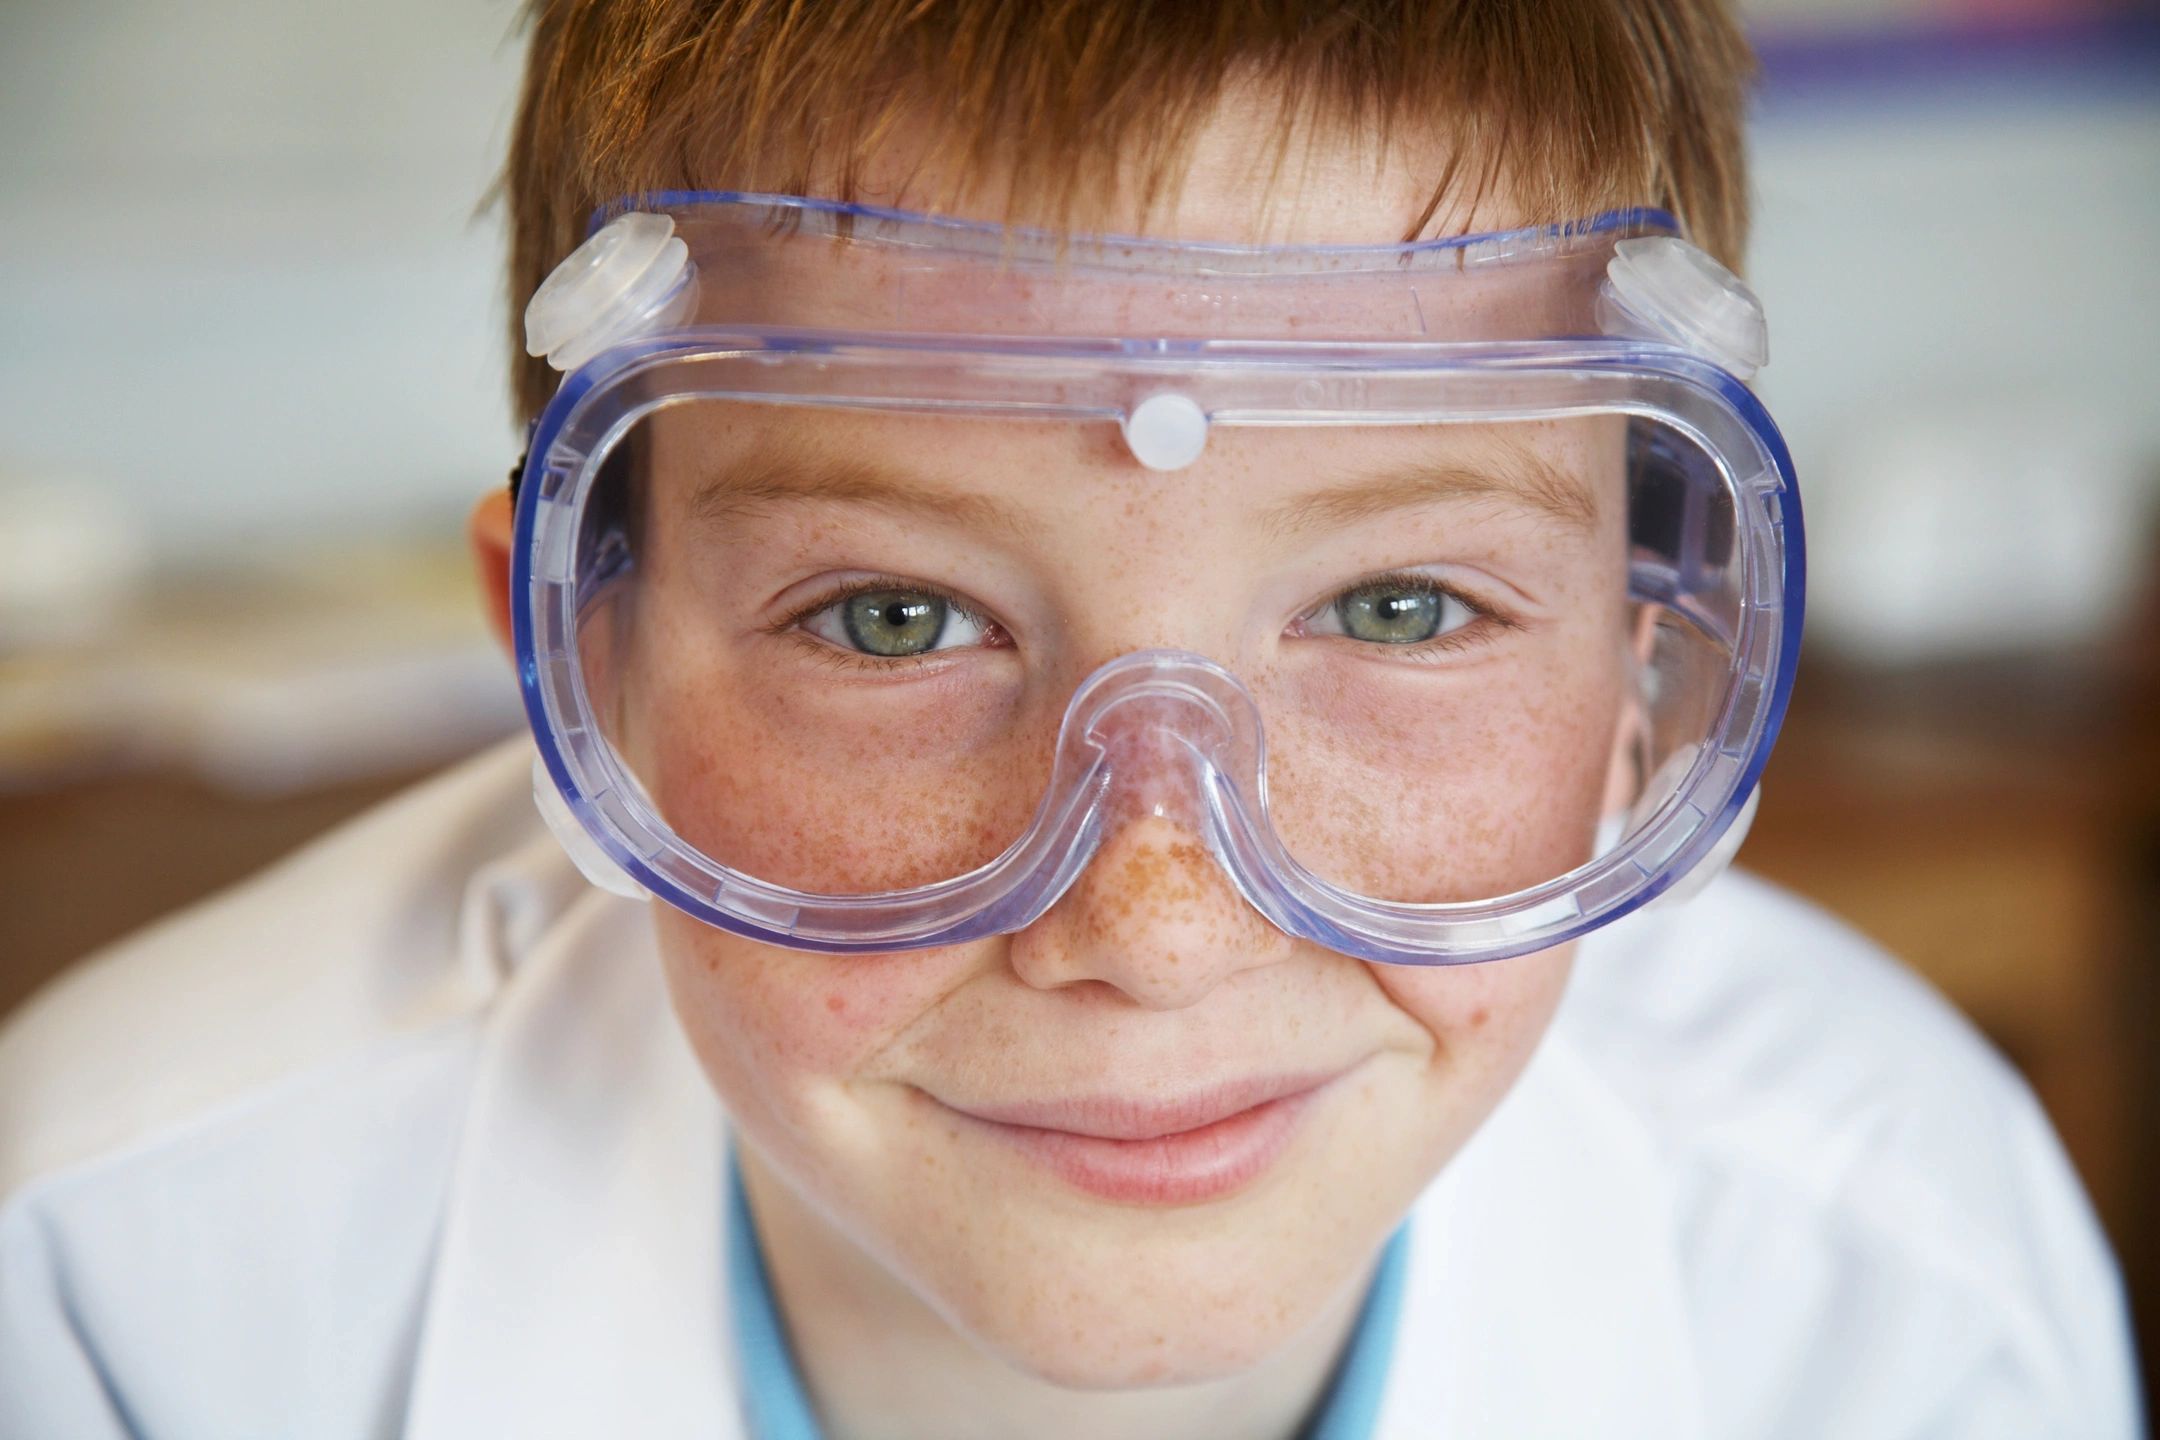 A young boy wearing goggles and lab coat.